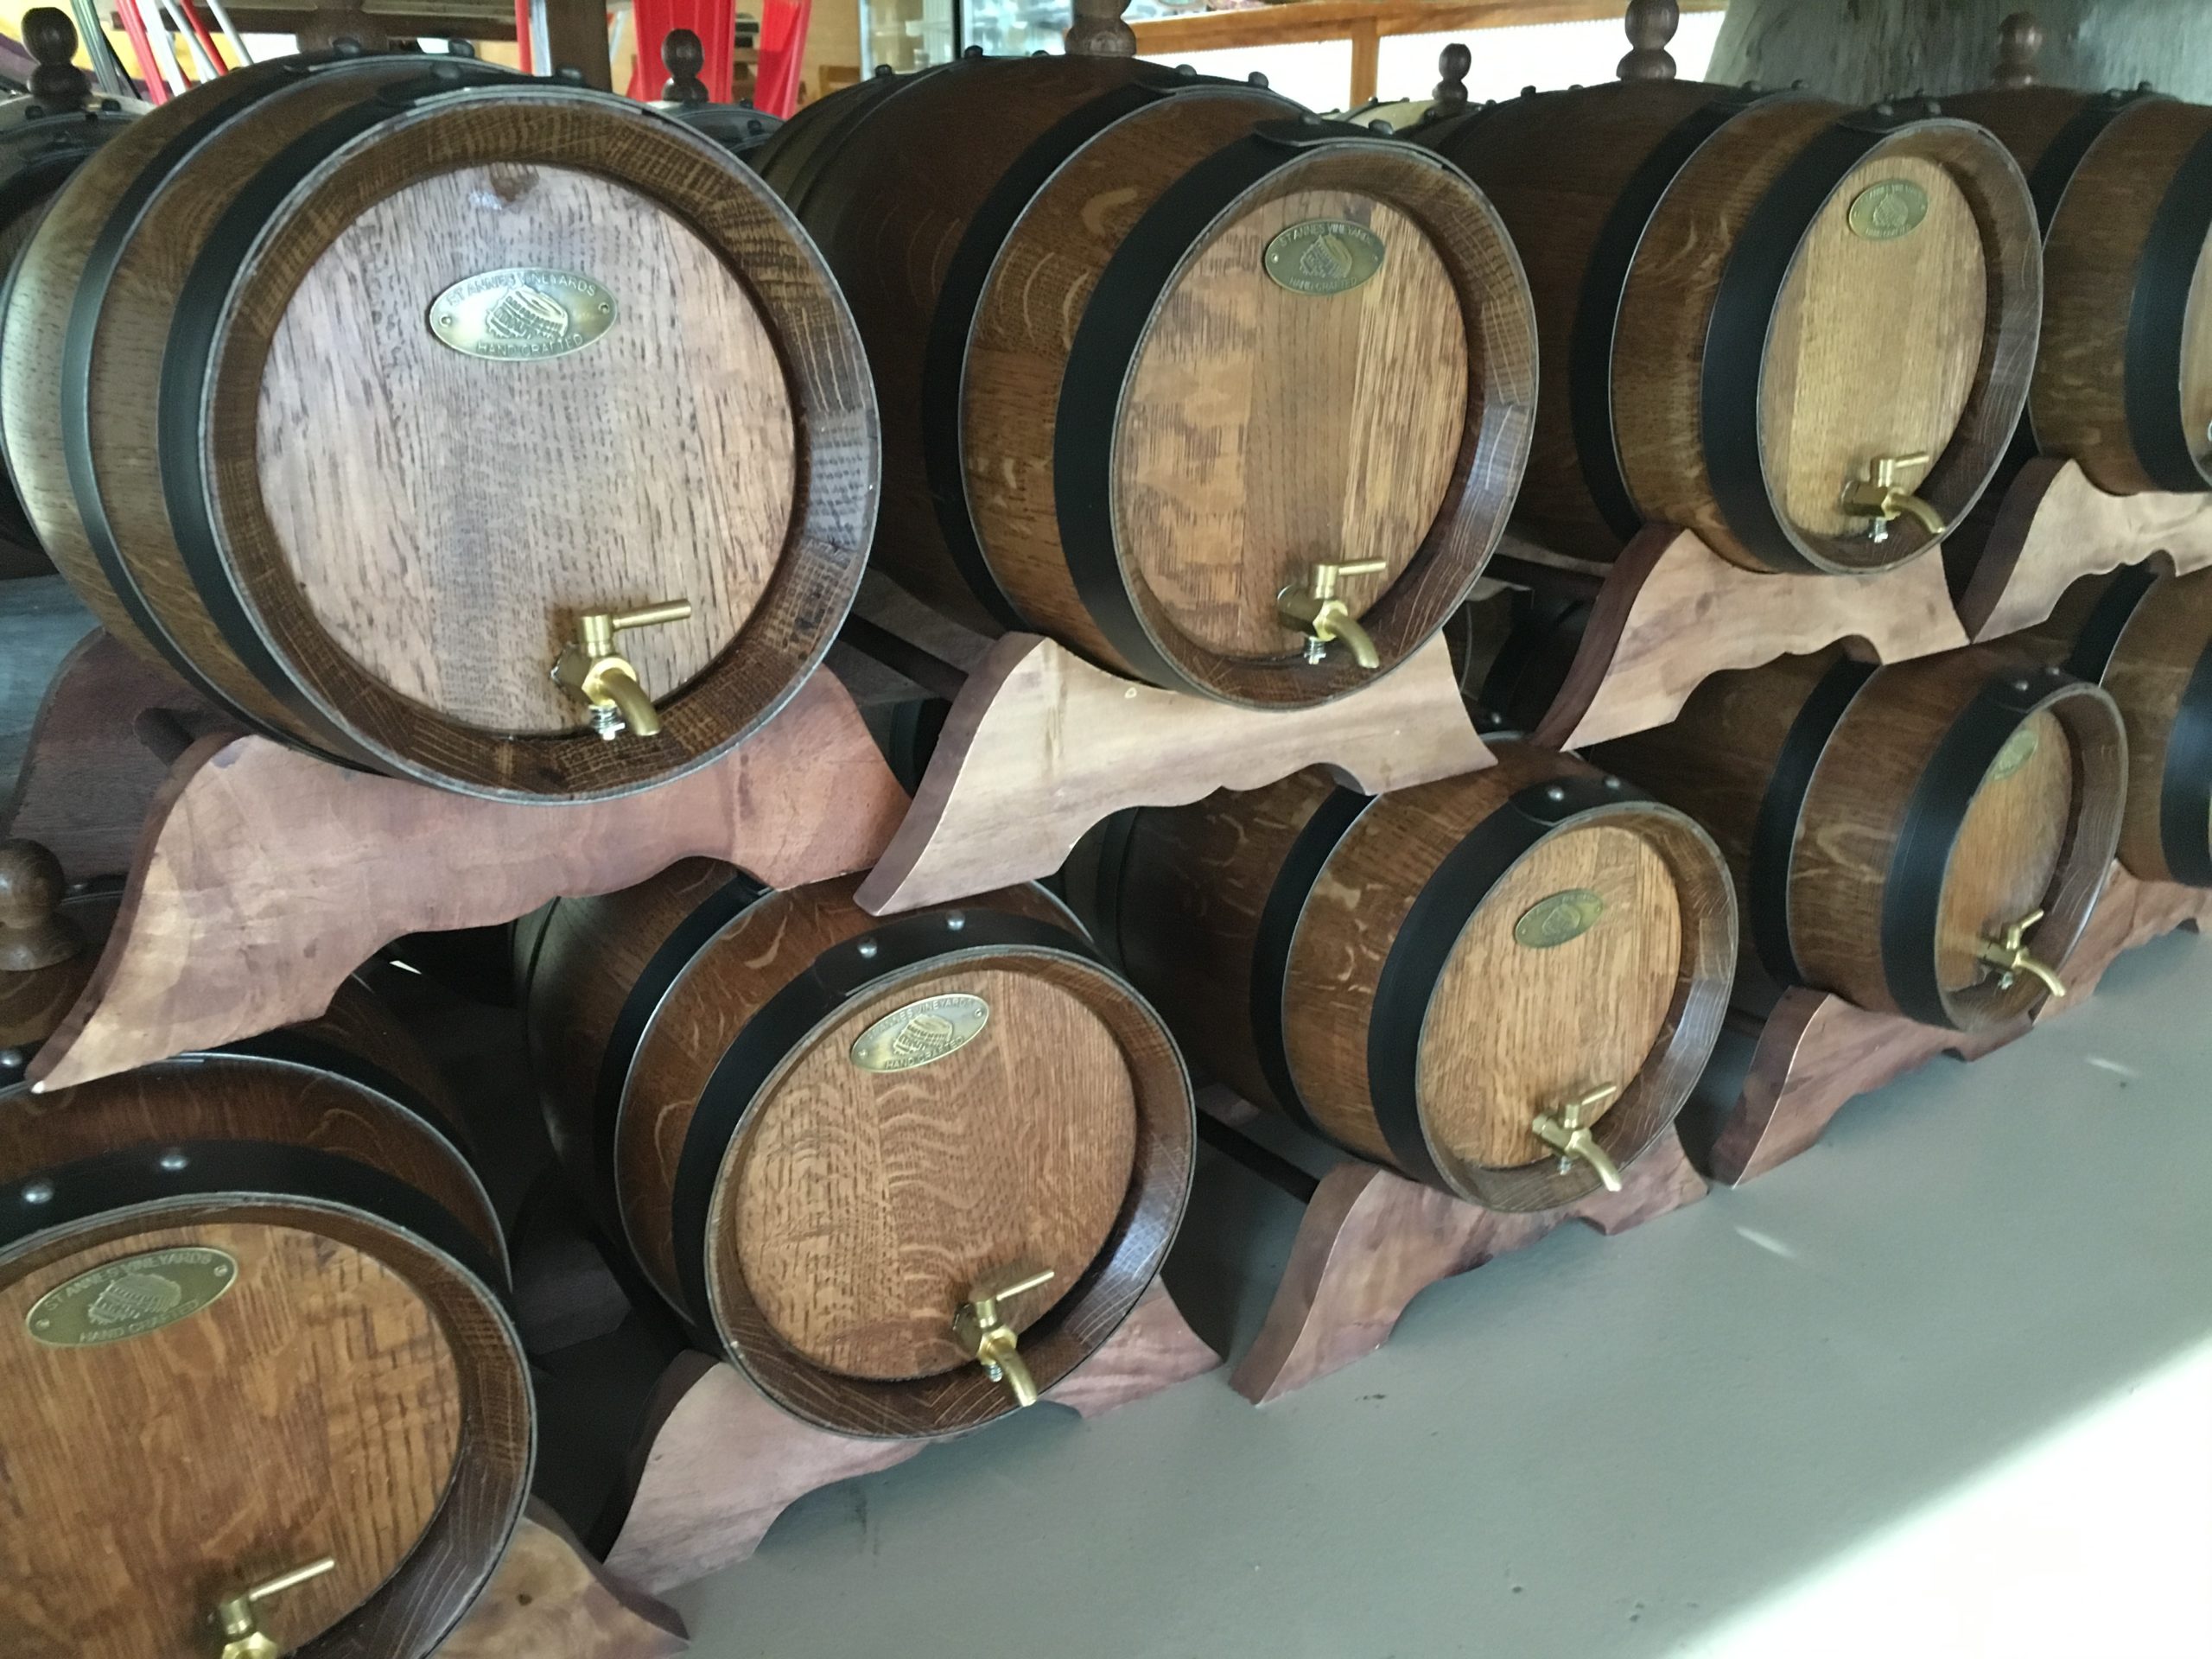 Port Barrels at St Anne's Winery in Moama